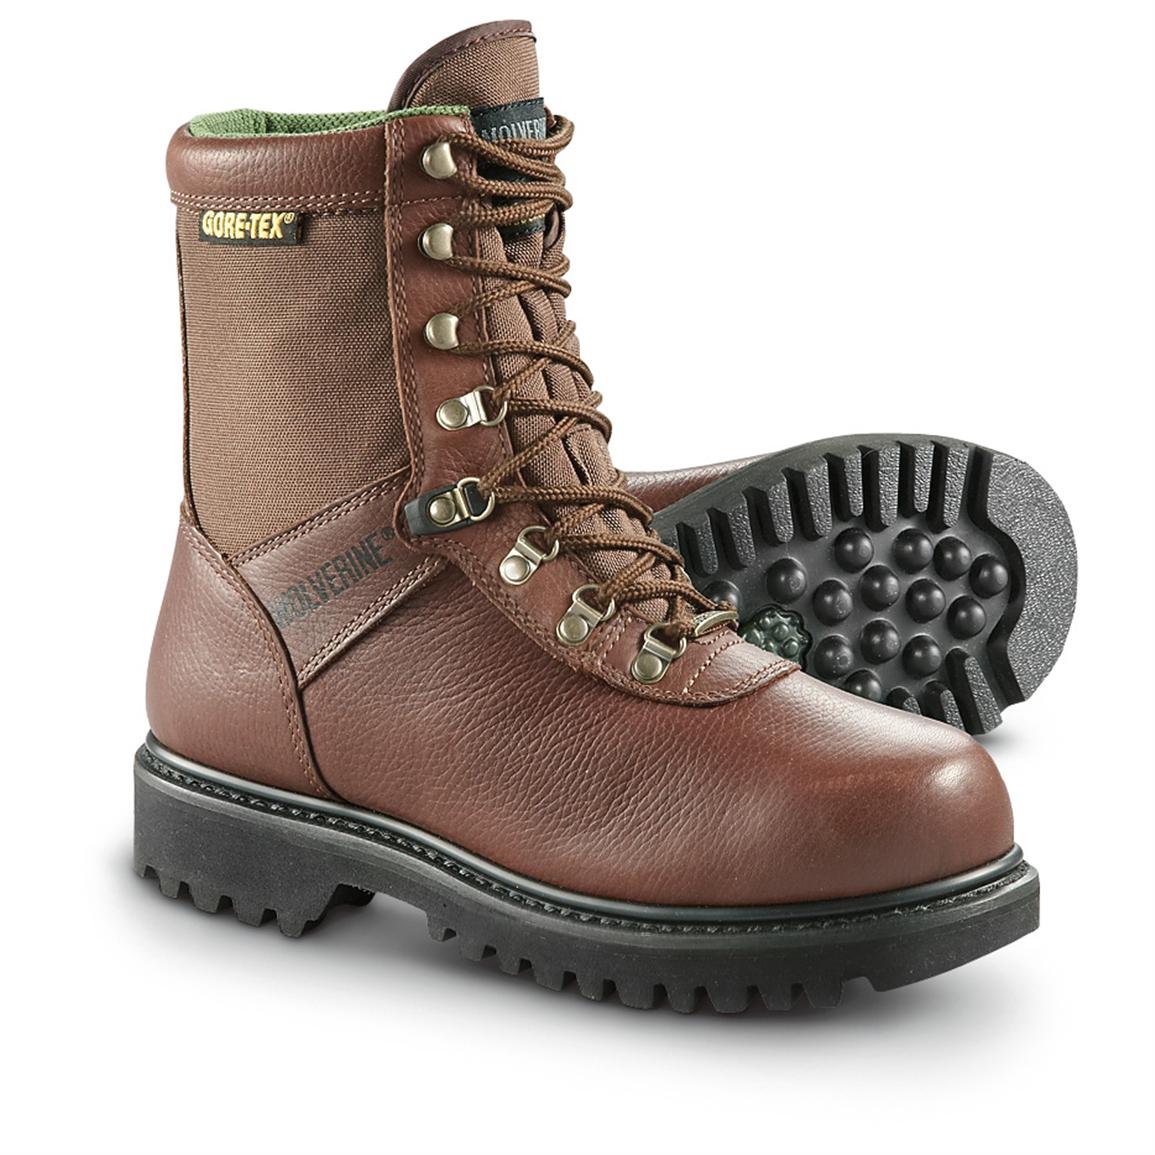 Sale > wolverine hunting boots clearance > is stock